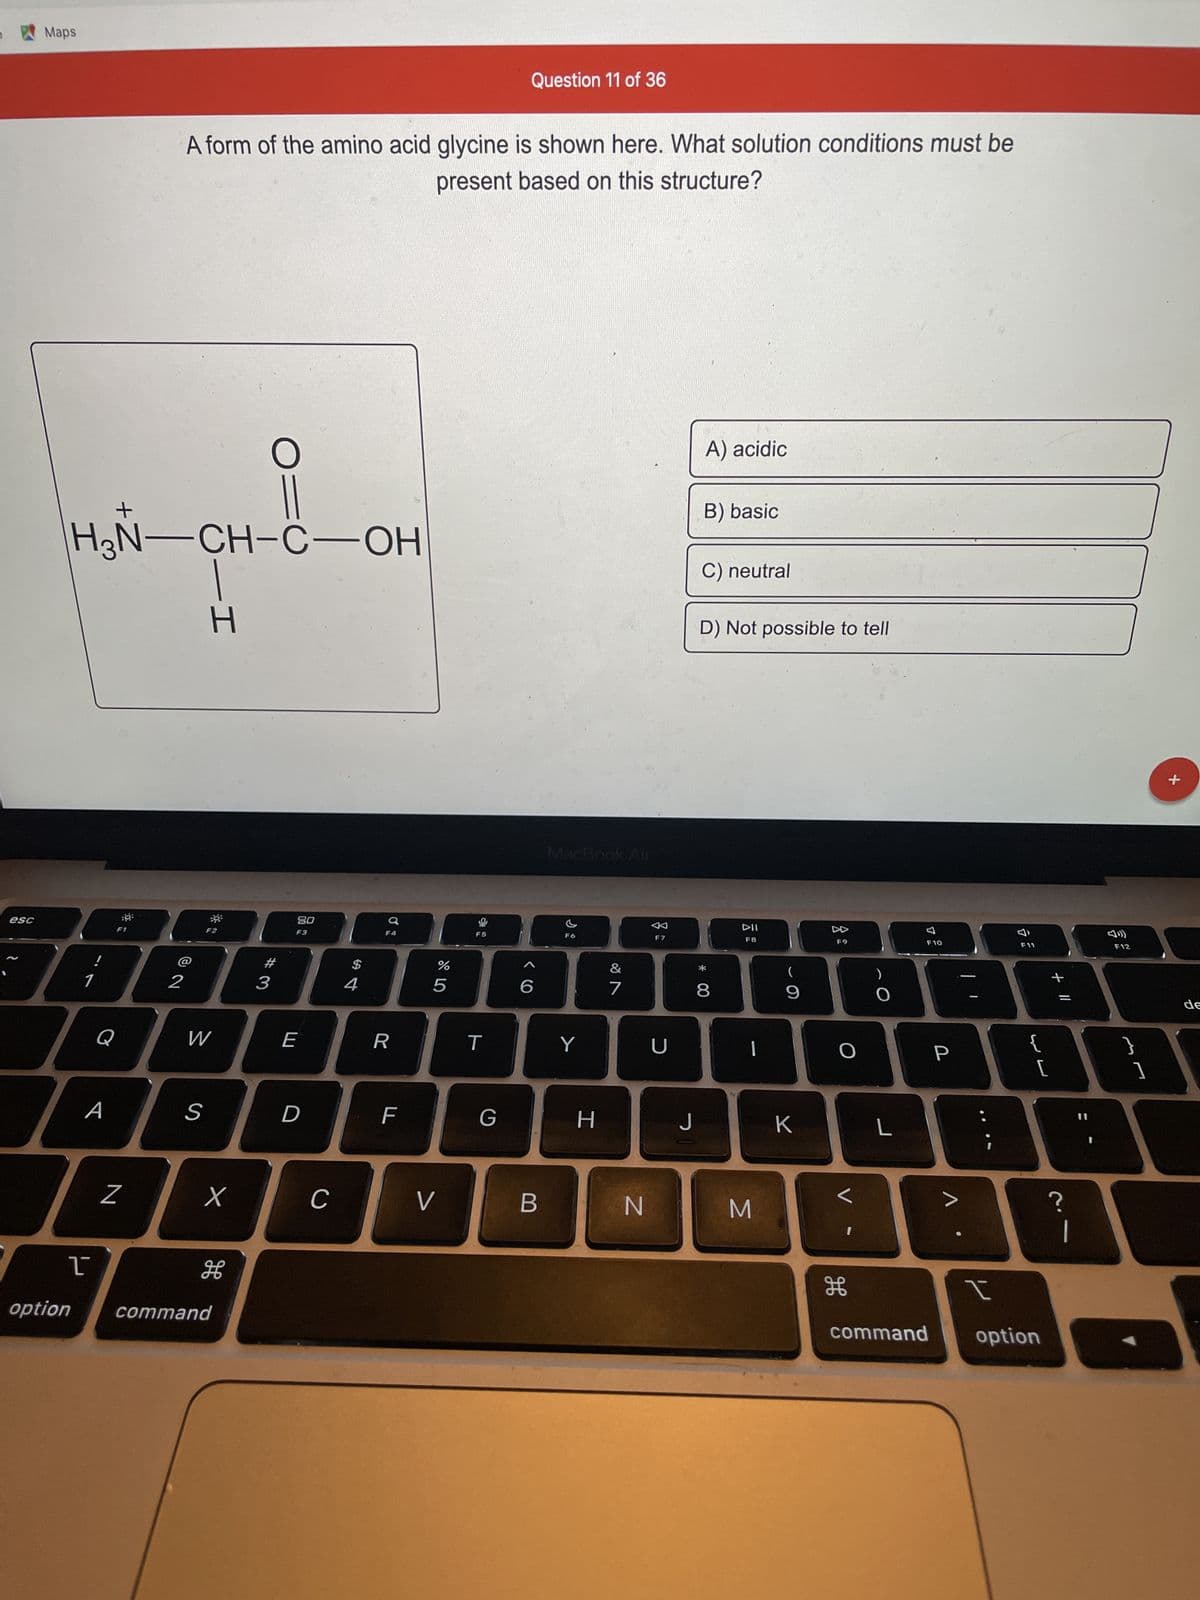 esc
Maps
option
1
1
+
A
H₂N-CH-C-OH
Q
::
F1
N
2
A form of the amino acid glycine is shown here. What solution conditions must be
present based on this structure?
55-1
S
F2
W
²
x
H
command
O:
#
3
80
F3
E
D
C
$
4
F4
R
F
%
5
V
F5
T
Question 11 of 36
G
6
B
MacBook Air
F6
Y
H
&
7
N
F7
U
J
A) acidic
B) basic
C) neutral
D) Not possible to tell
*
8
DII
F8
|
M
9
K
F9
O
H
O
L
F10
P
I
F11
لالها
{
[
command option
+ 11
?
F12
]
+
de